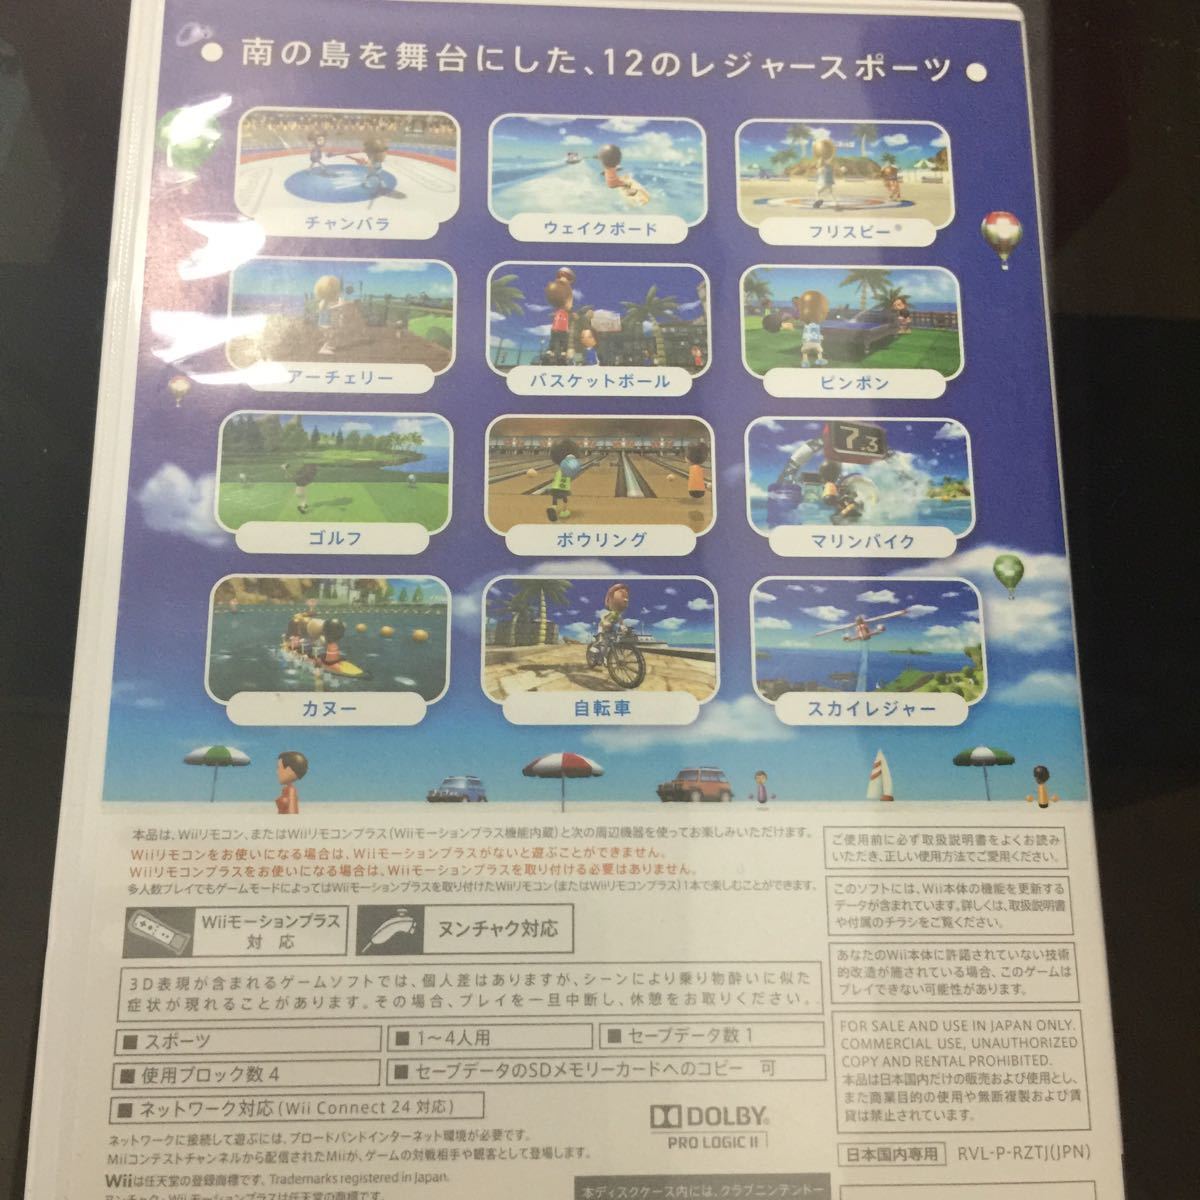 Wiiスポーツリゾート Wii Sports Resort